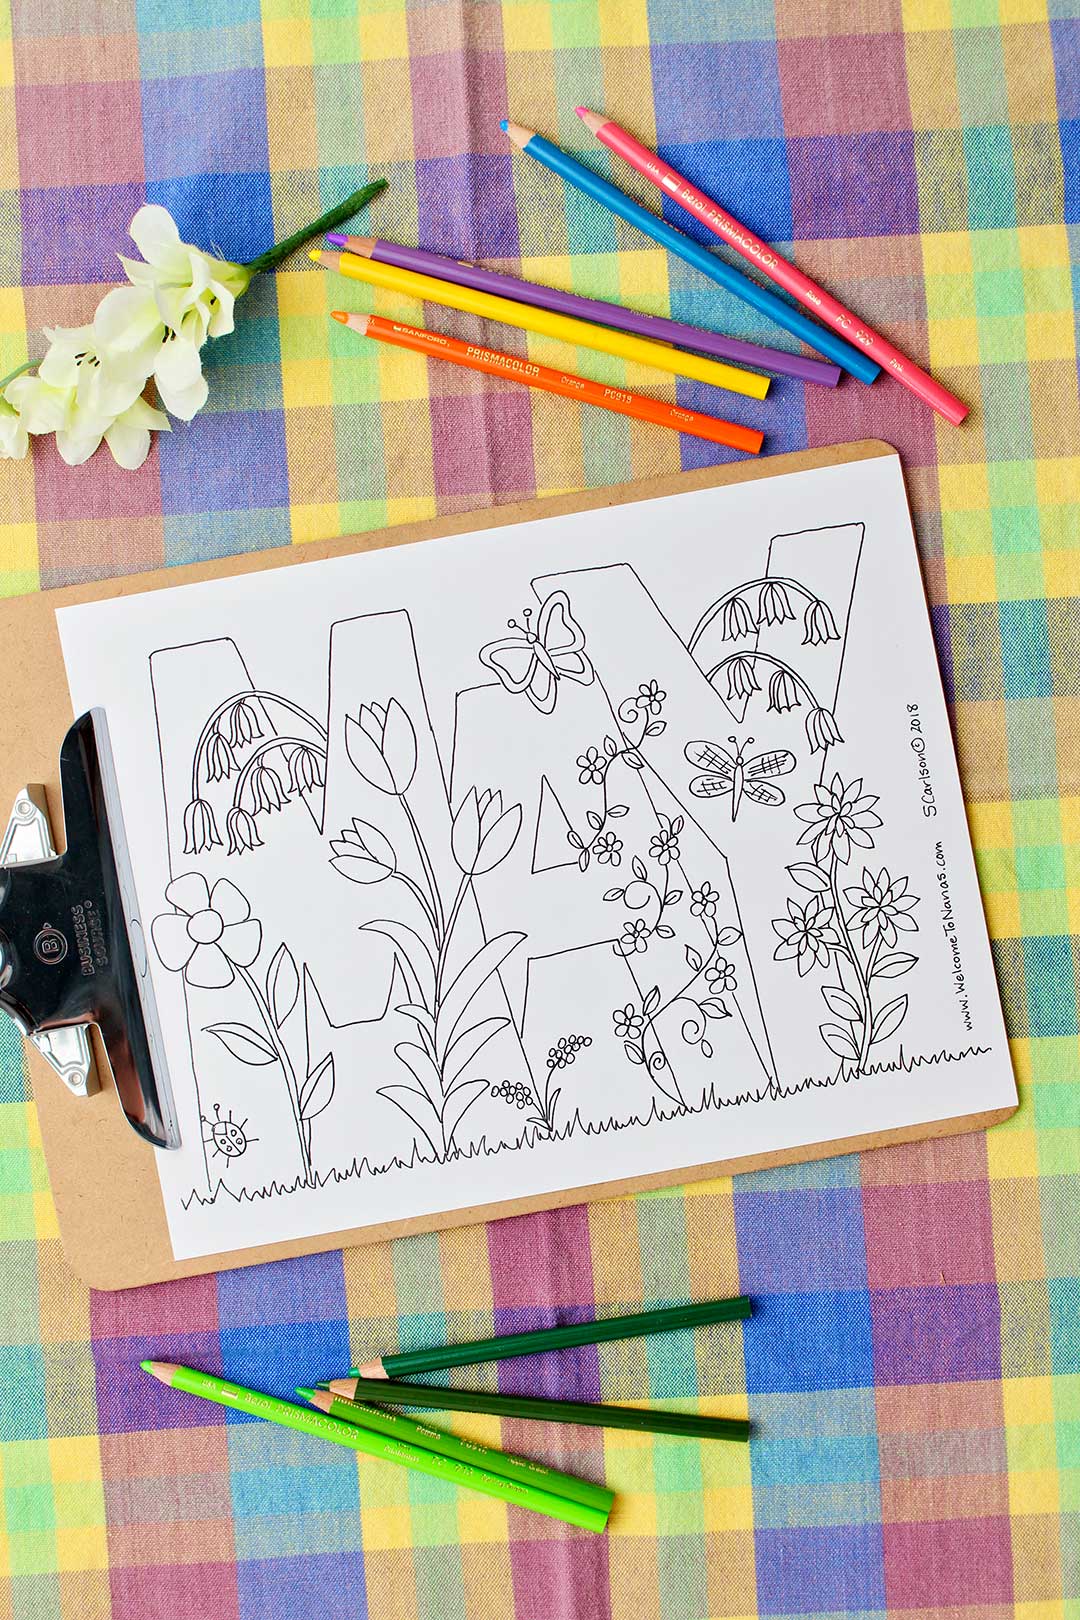 Uncolored May Coloring page clipped to a clip board resting on a colorful plaid background.